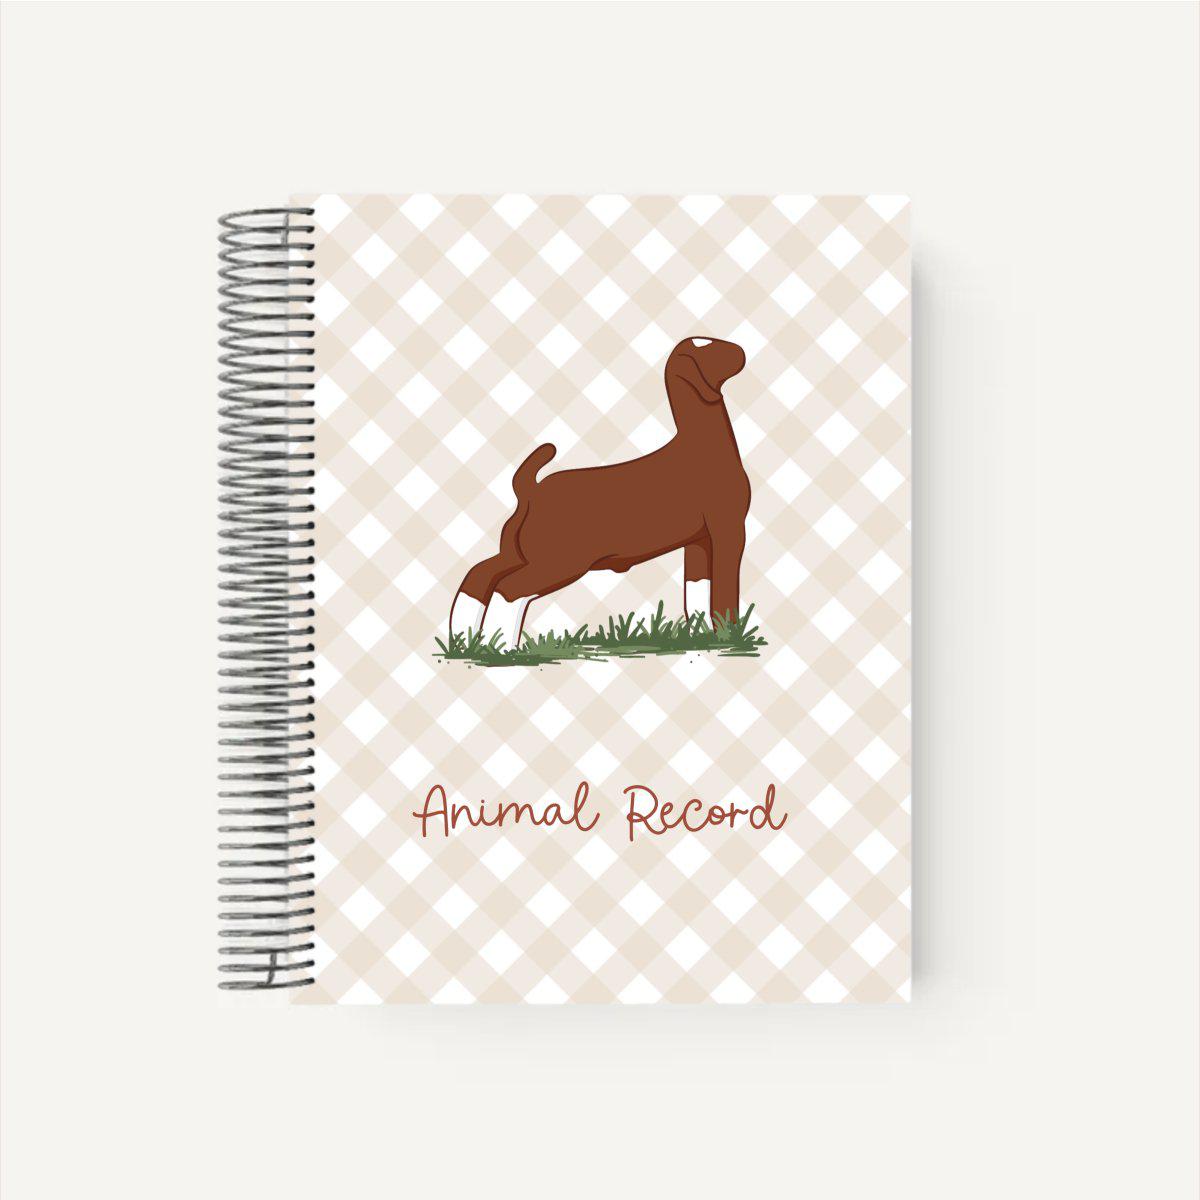 Personalized-Livestock-Animal Record Planner - Gingham Cover